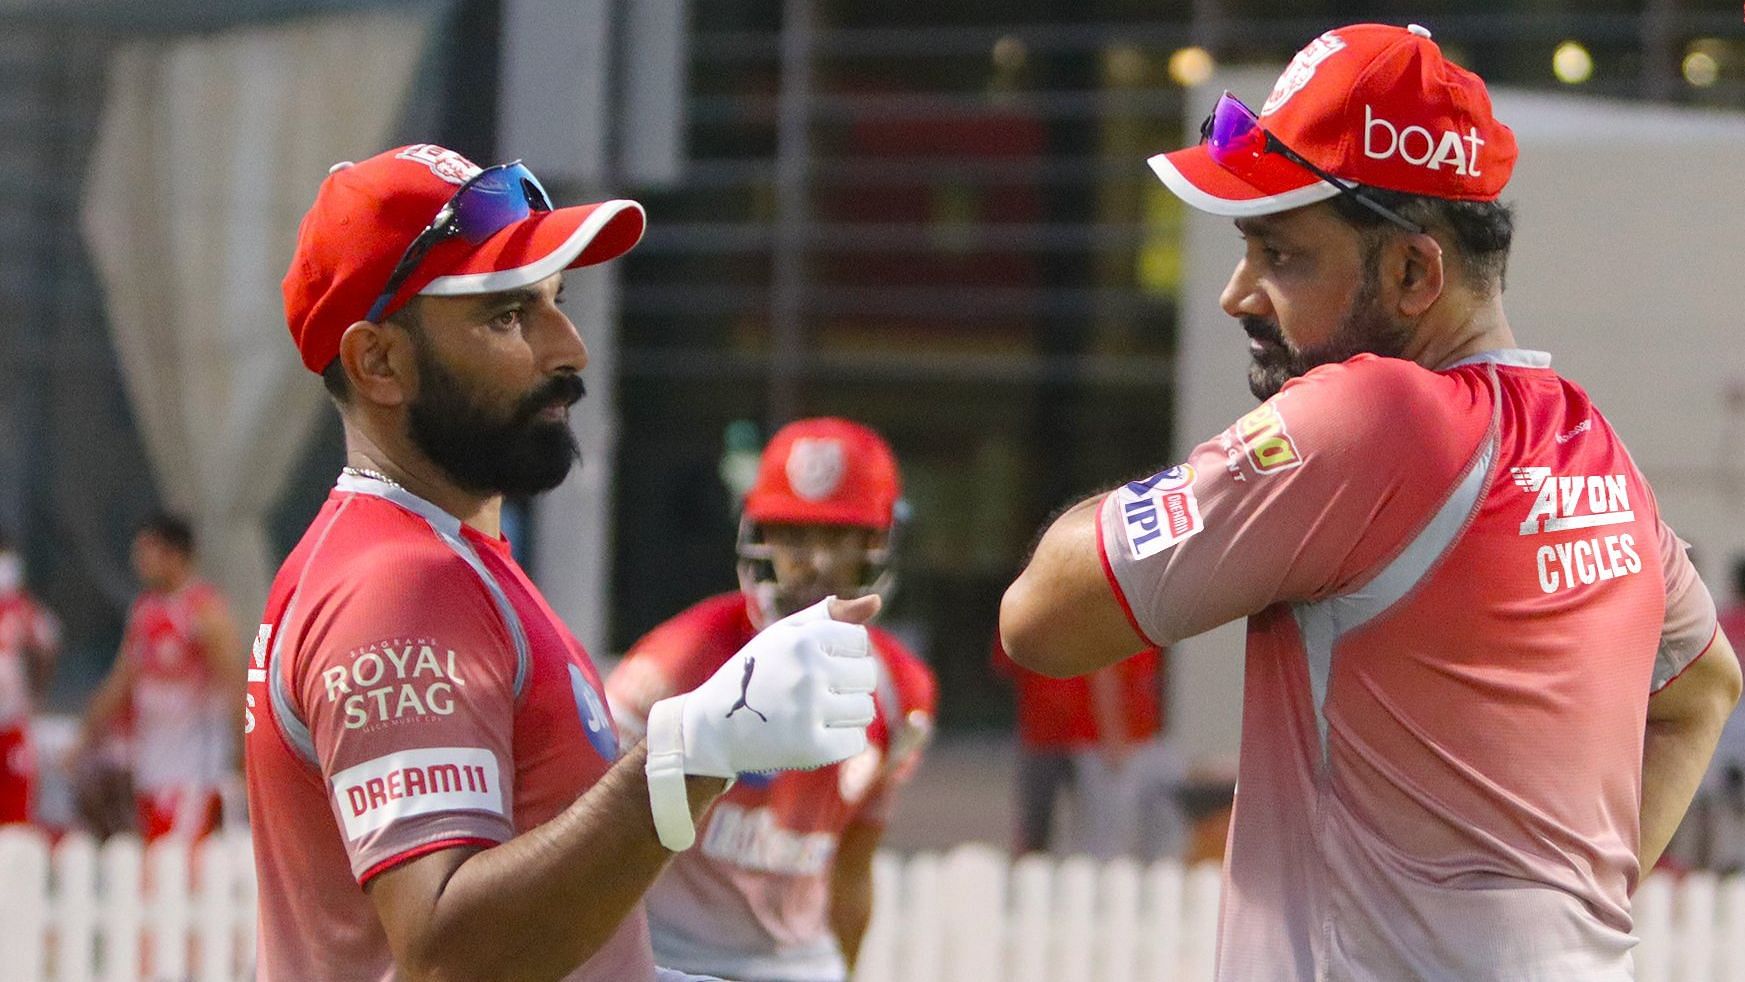 Kings XI Punjab coach Anil Kumble thinks his team has ability, they just have to put the performances together.